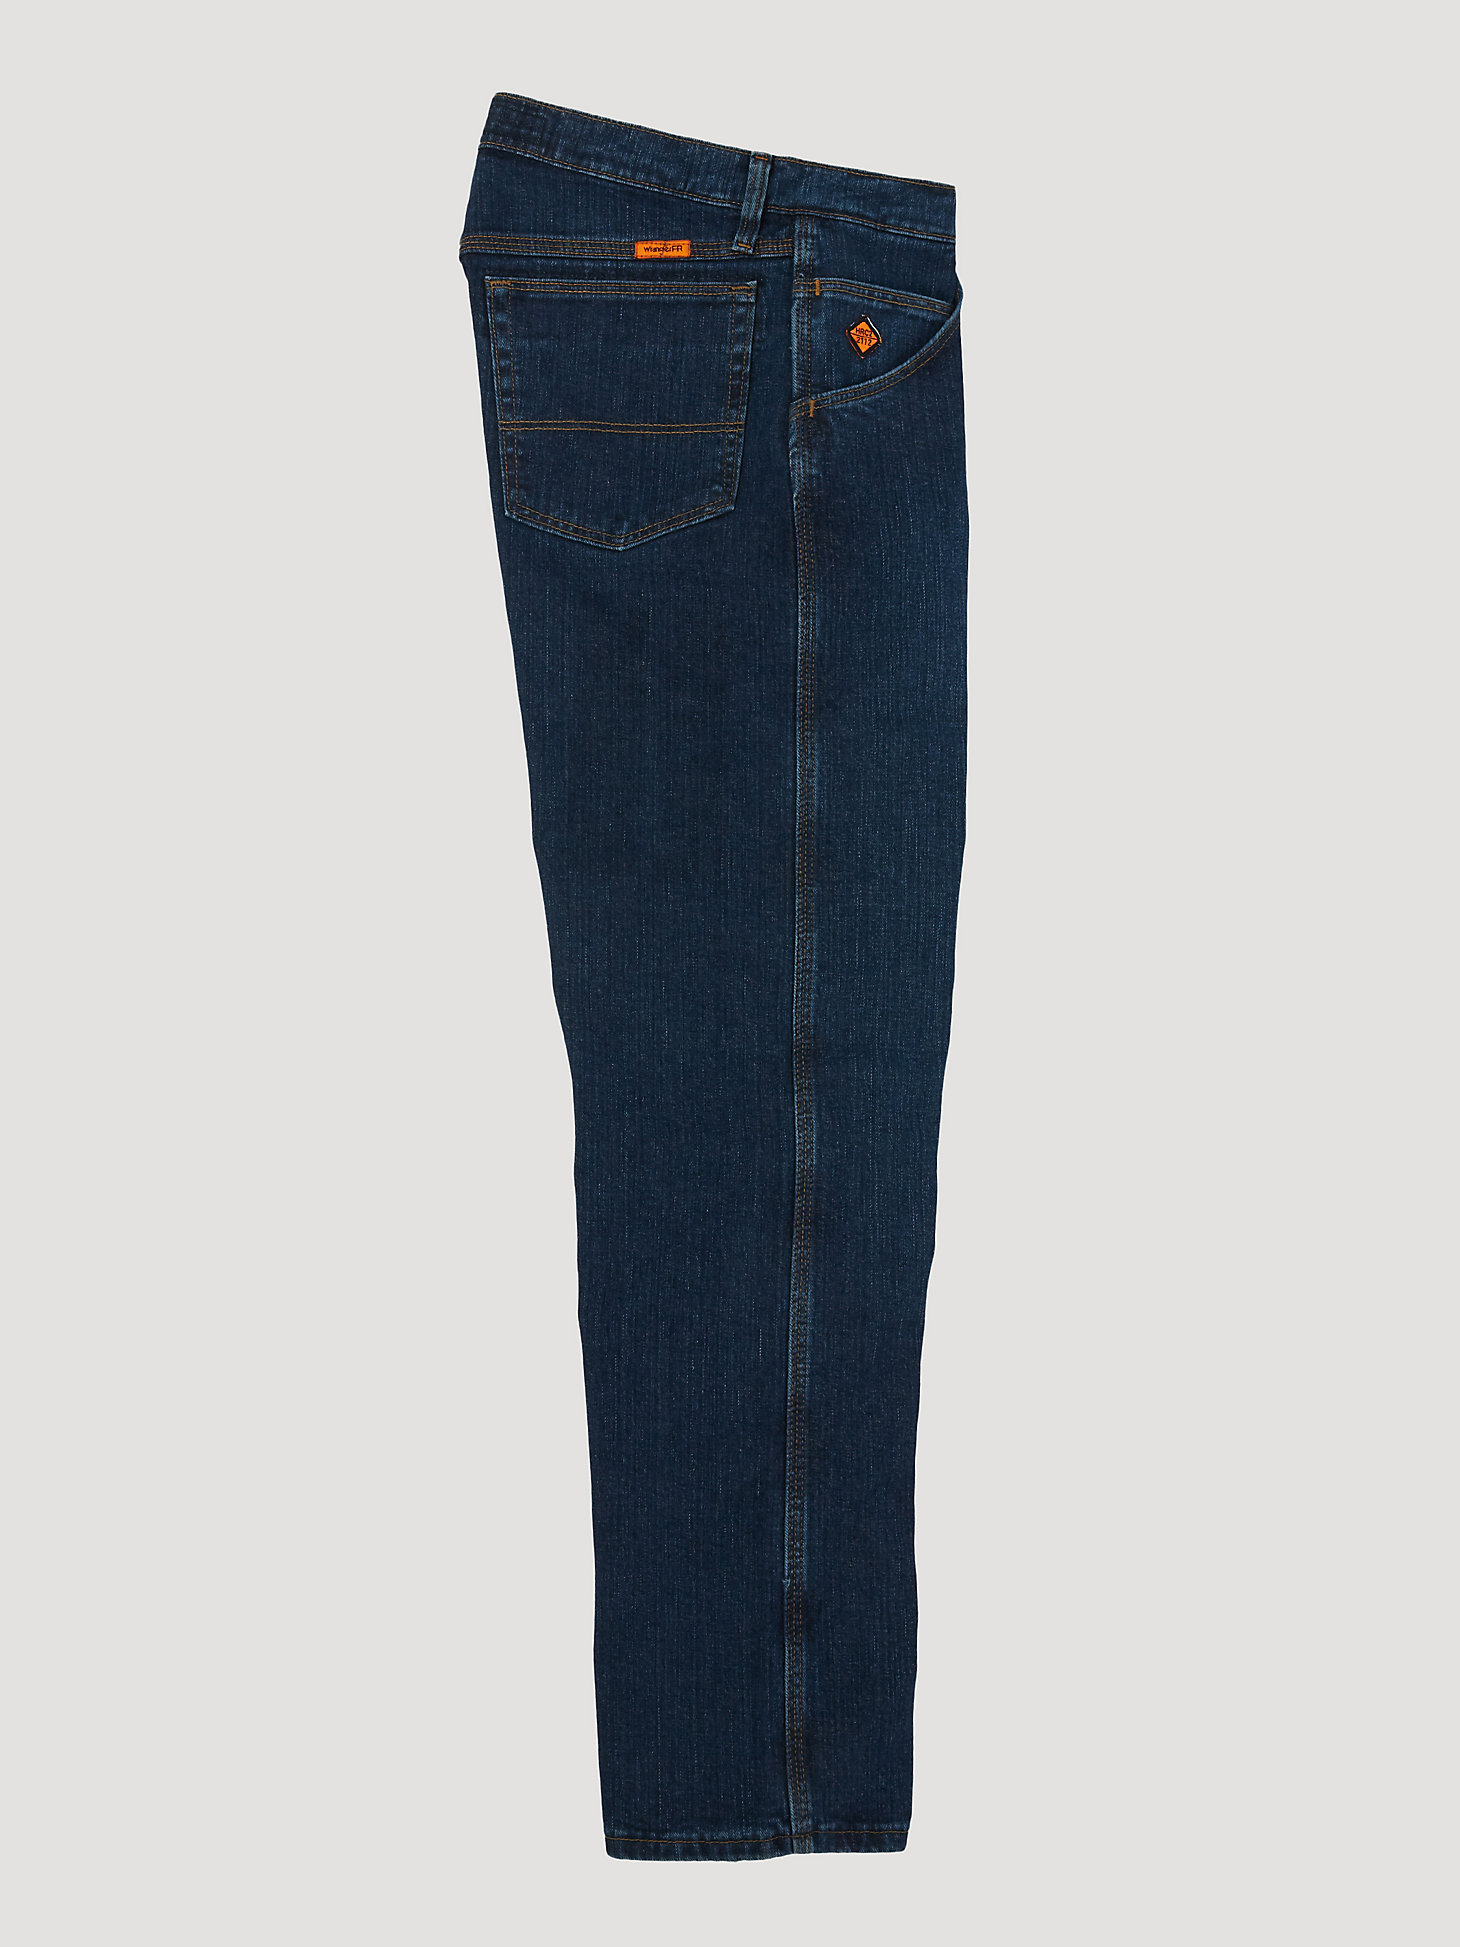 Wrangler® RIGGS Workwear® FR Flame Resistant Advanced Comfort Relaxed Fit Jean in Midstone alternative view 2